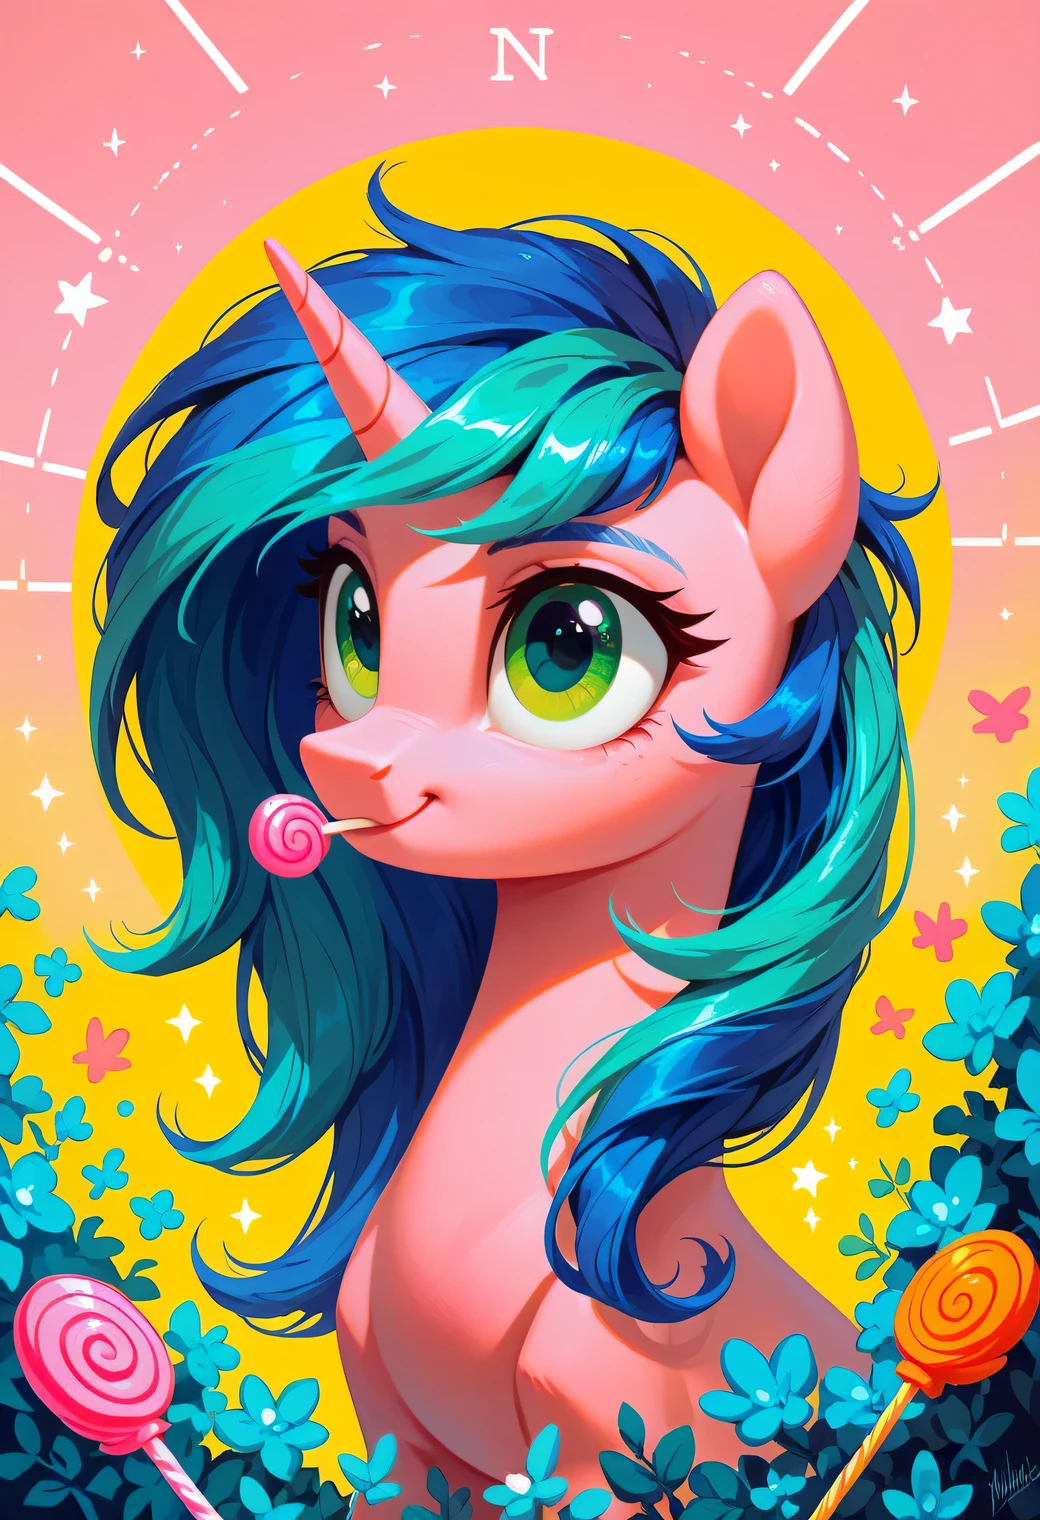 score_9, score_8_up, score_7_up,  ral-ltlpowny, pink candy, female pony, pink and blue mane, green eyes, aesthetic, kawaii background